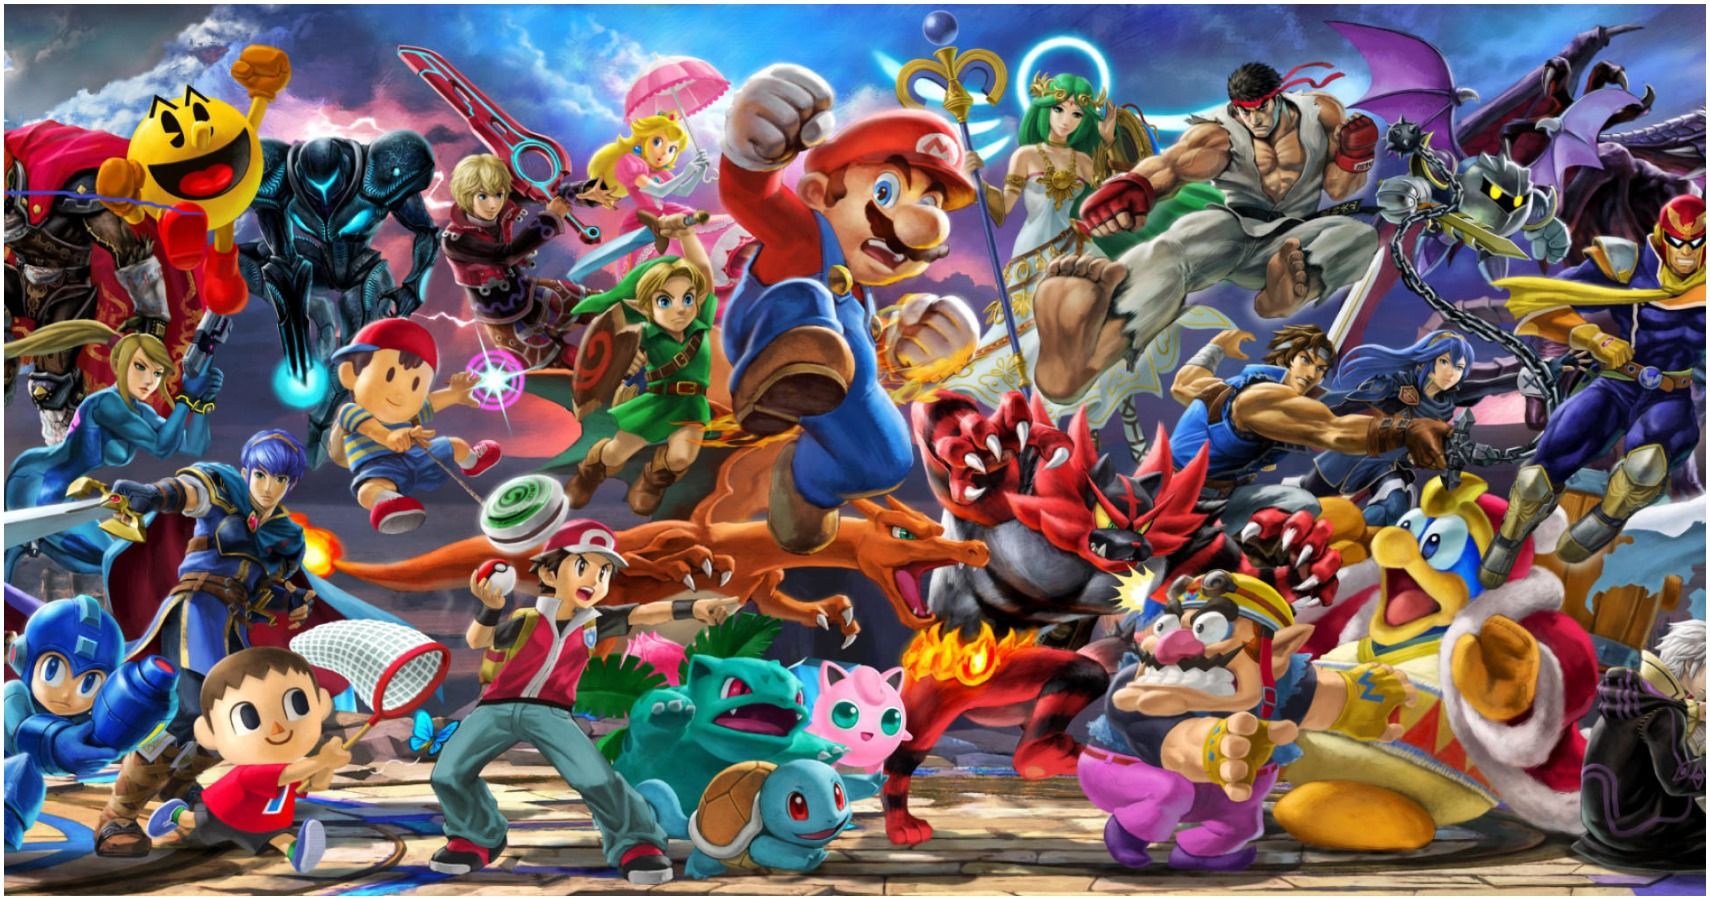 10 More Games Like Super Smash Bros for PC and Consoles 